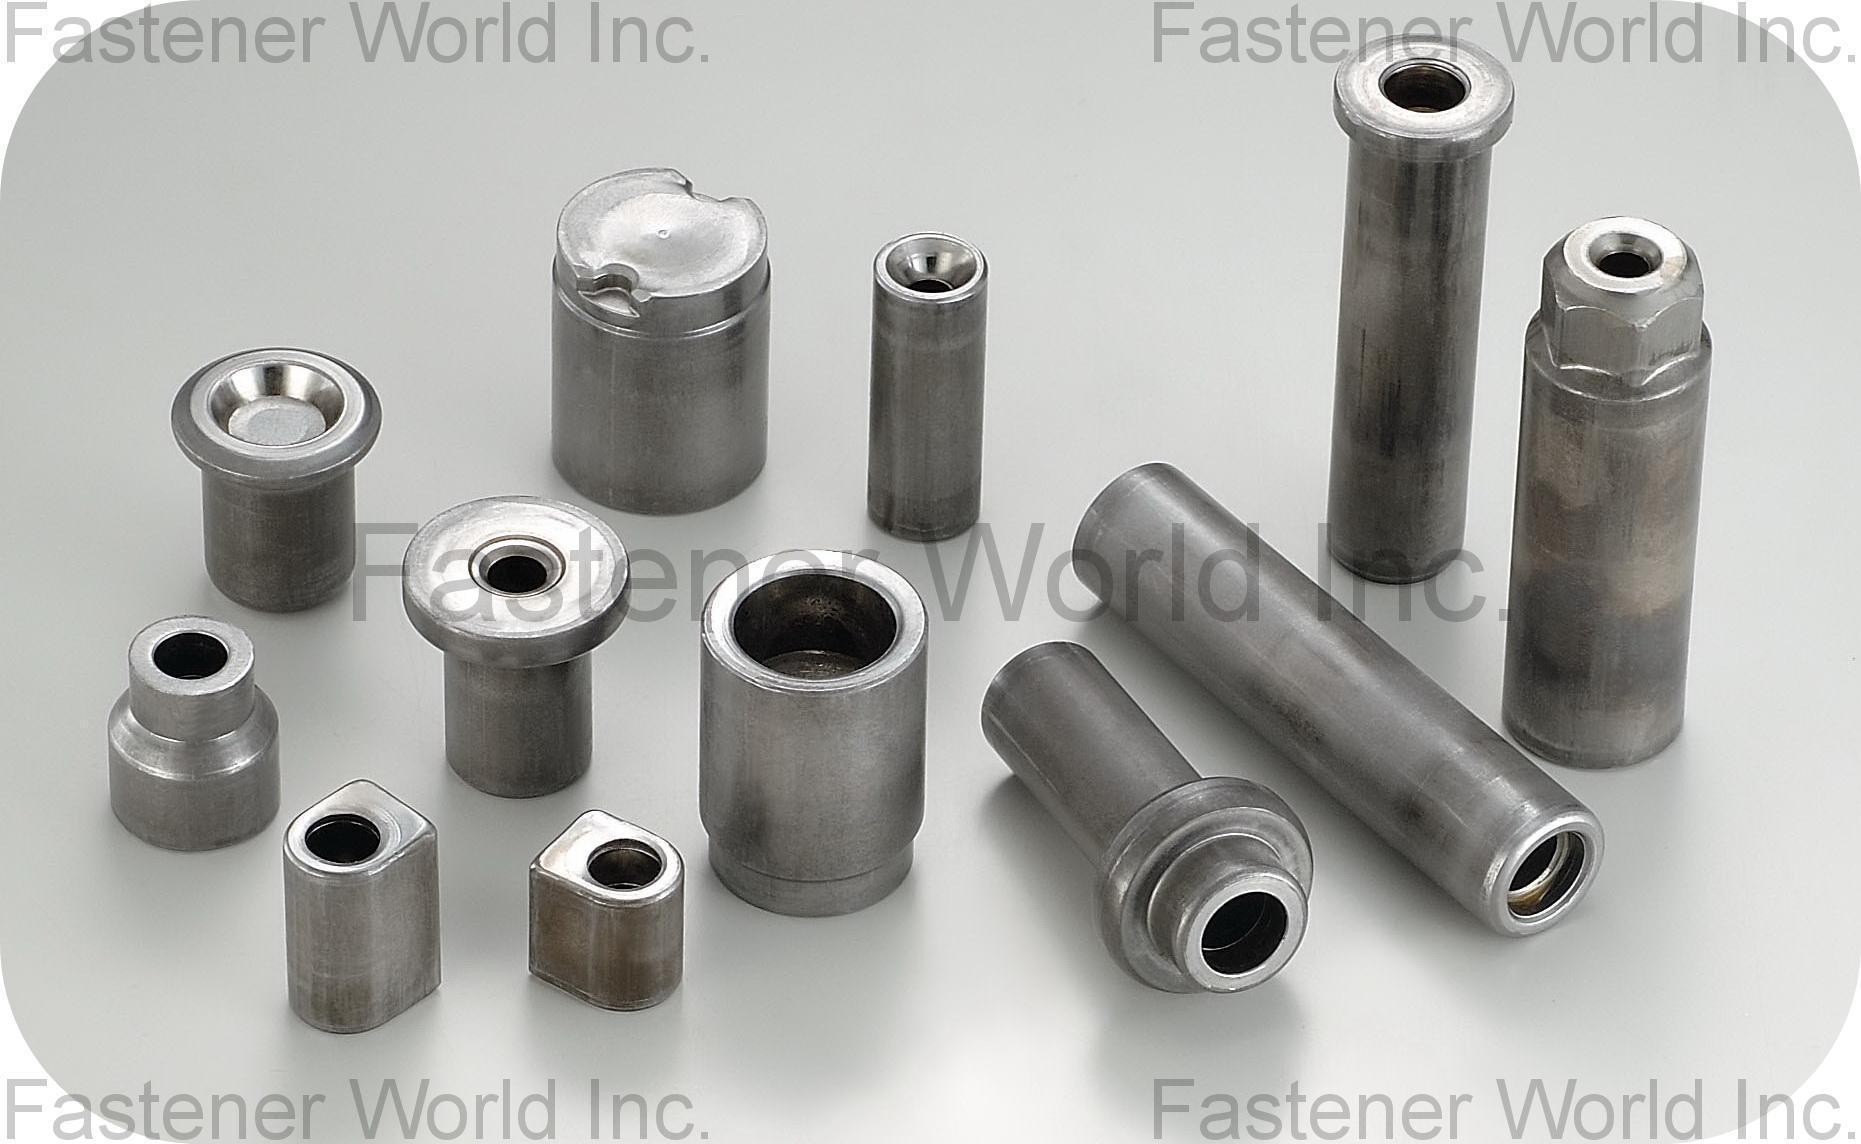 DUNFA INTERNATIONAL CO., LTD. , Cold Forming Parts for Autos, Motorcycles, Bikes, Buildings, Machines, Special Parts, Turning / Tapping Parts, Special Nuts, Anchors , Automotive Parts